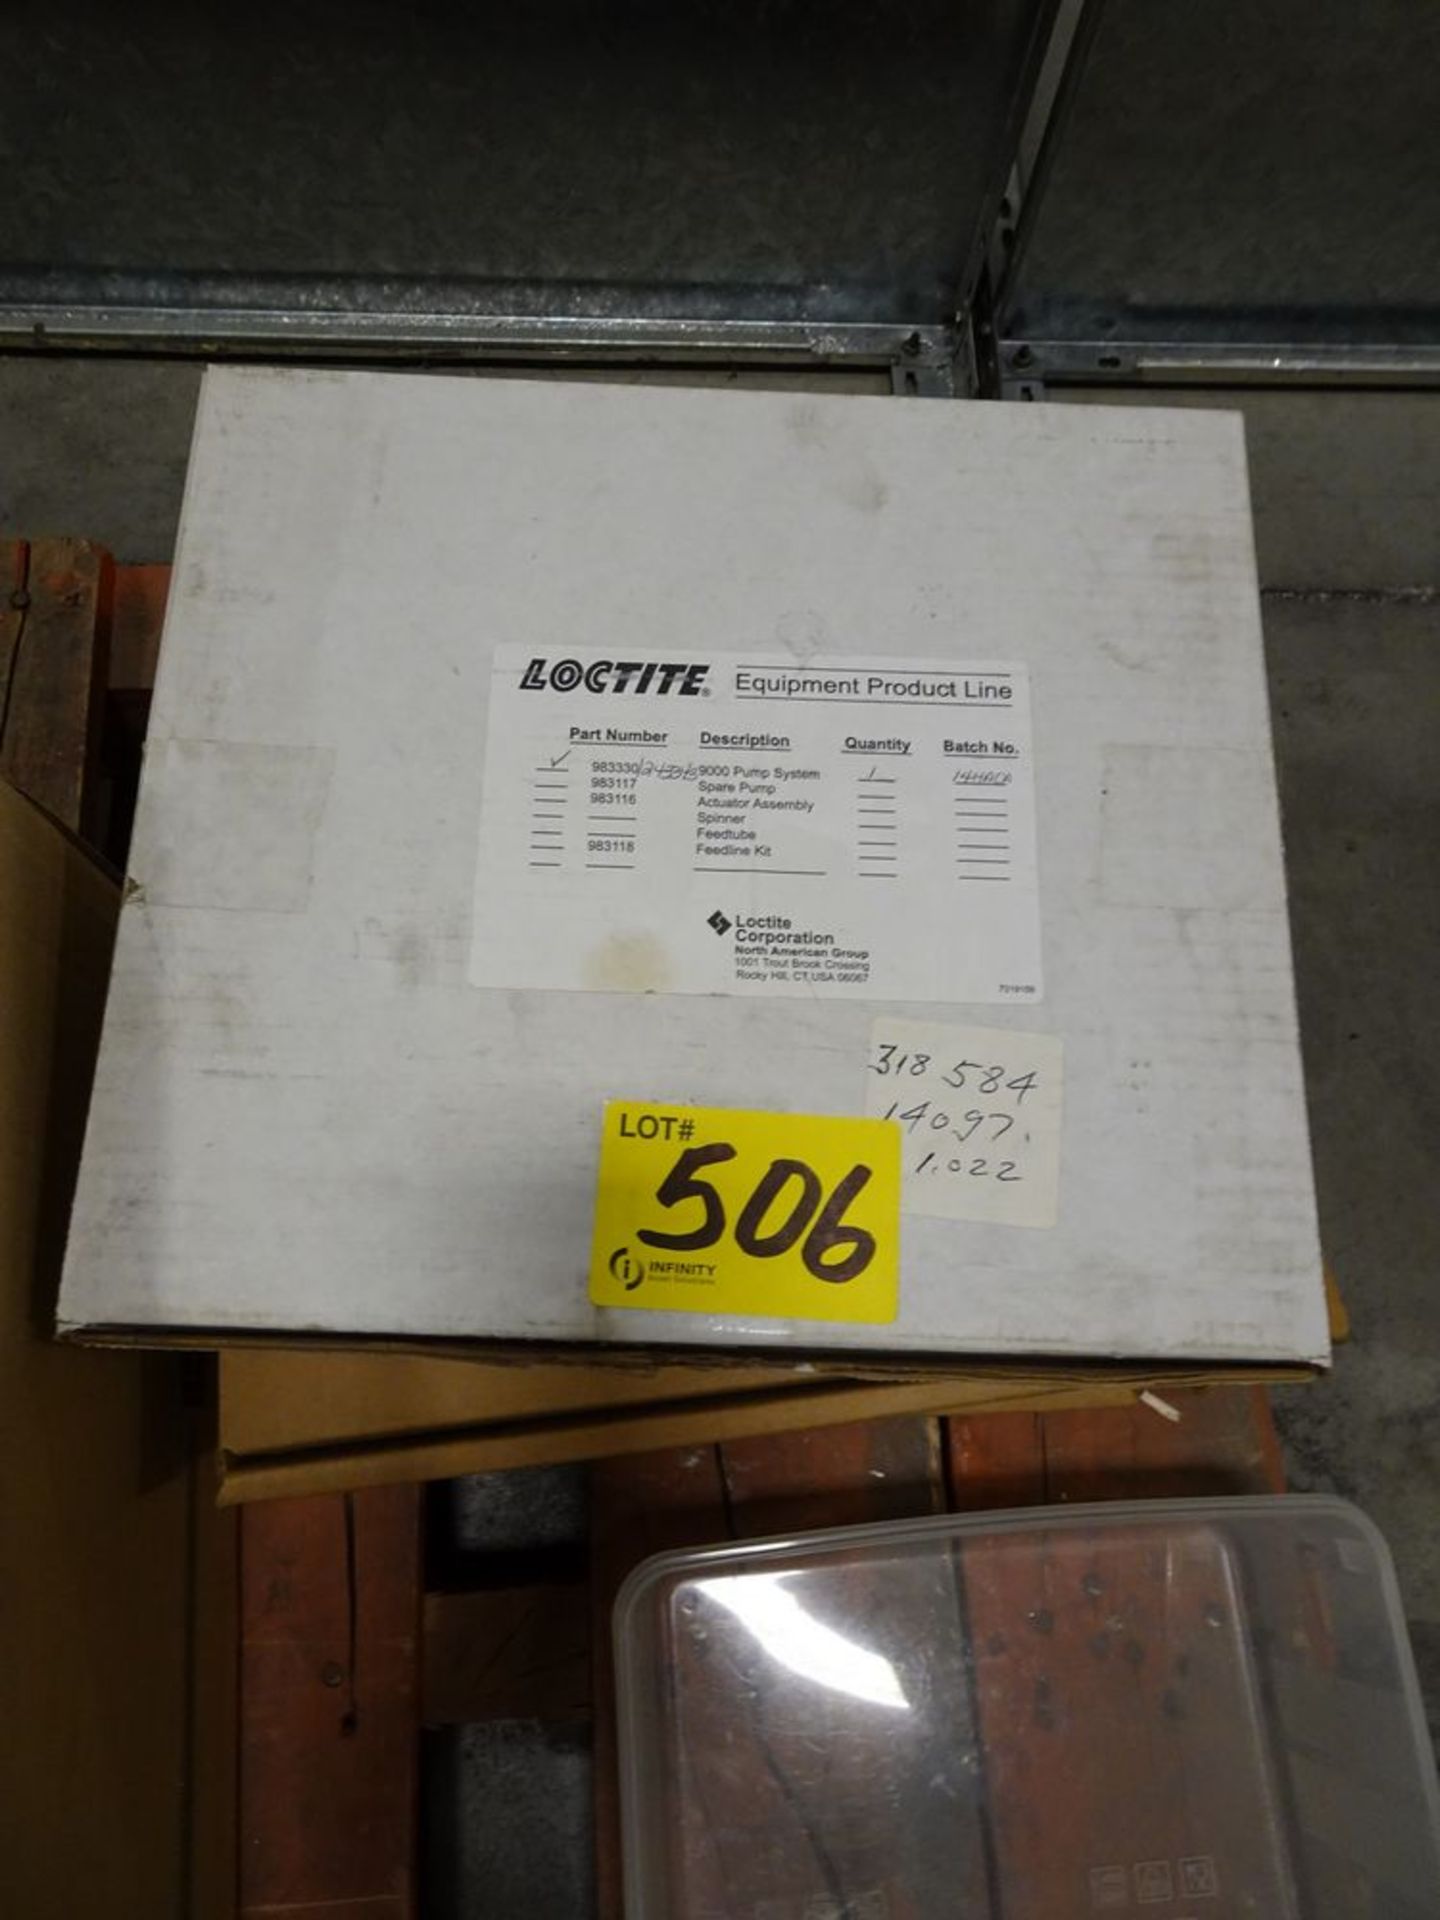 PALLET OF ASSORTED ALLEN-BRADLEY PRODUCT, LOCTITE COMPONENTS, ETC. - Image 3 of 3